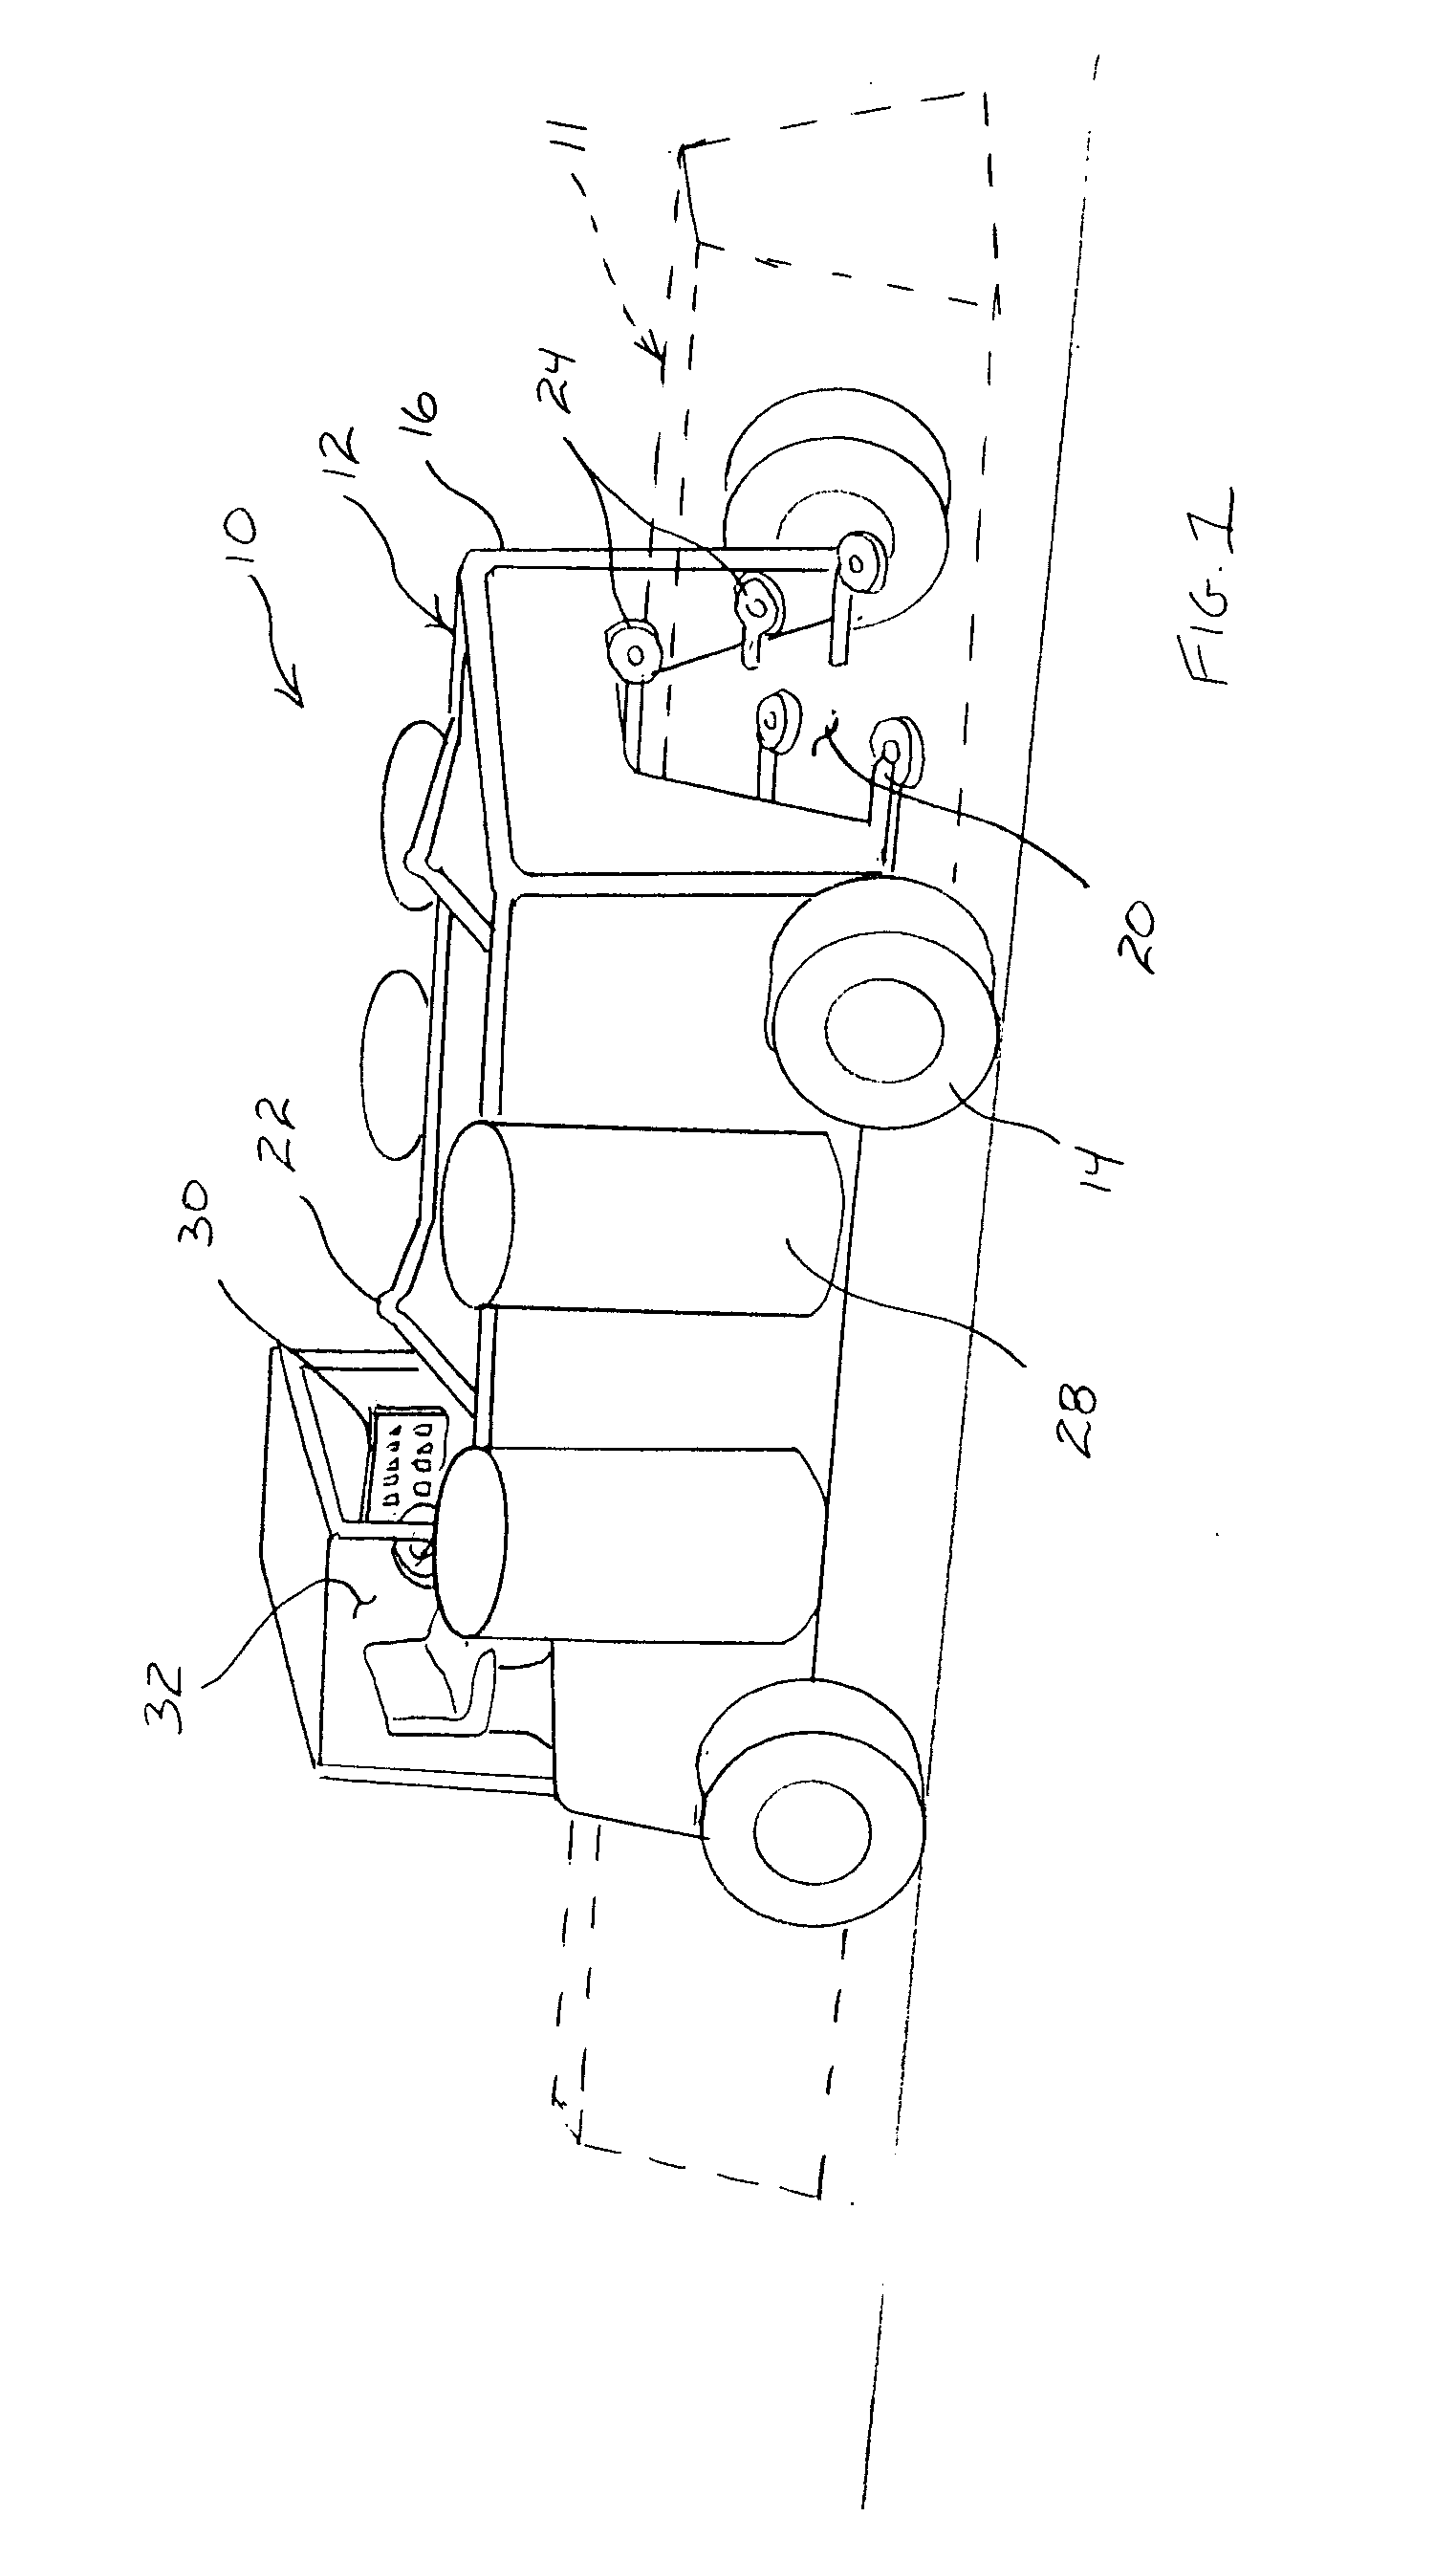 Apparatus and method for cleaning, painting and/or treating traffic barriers